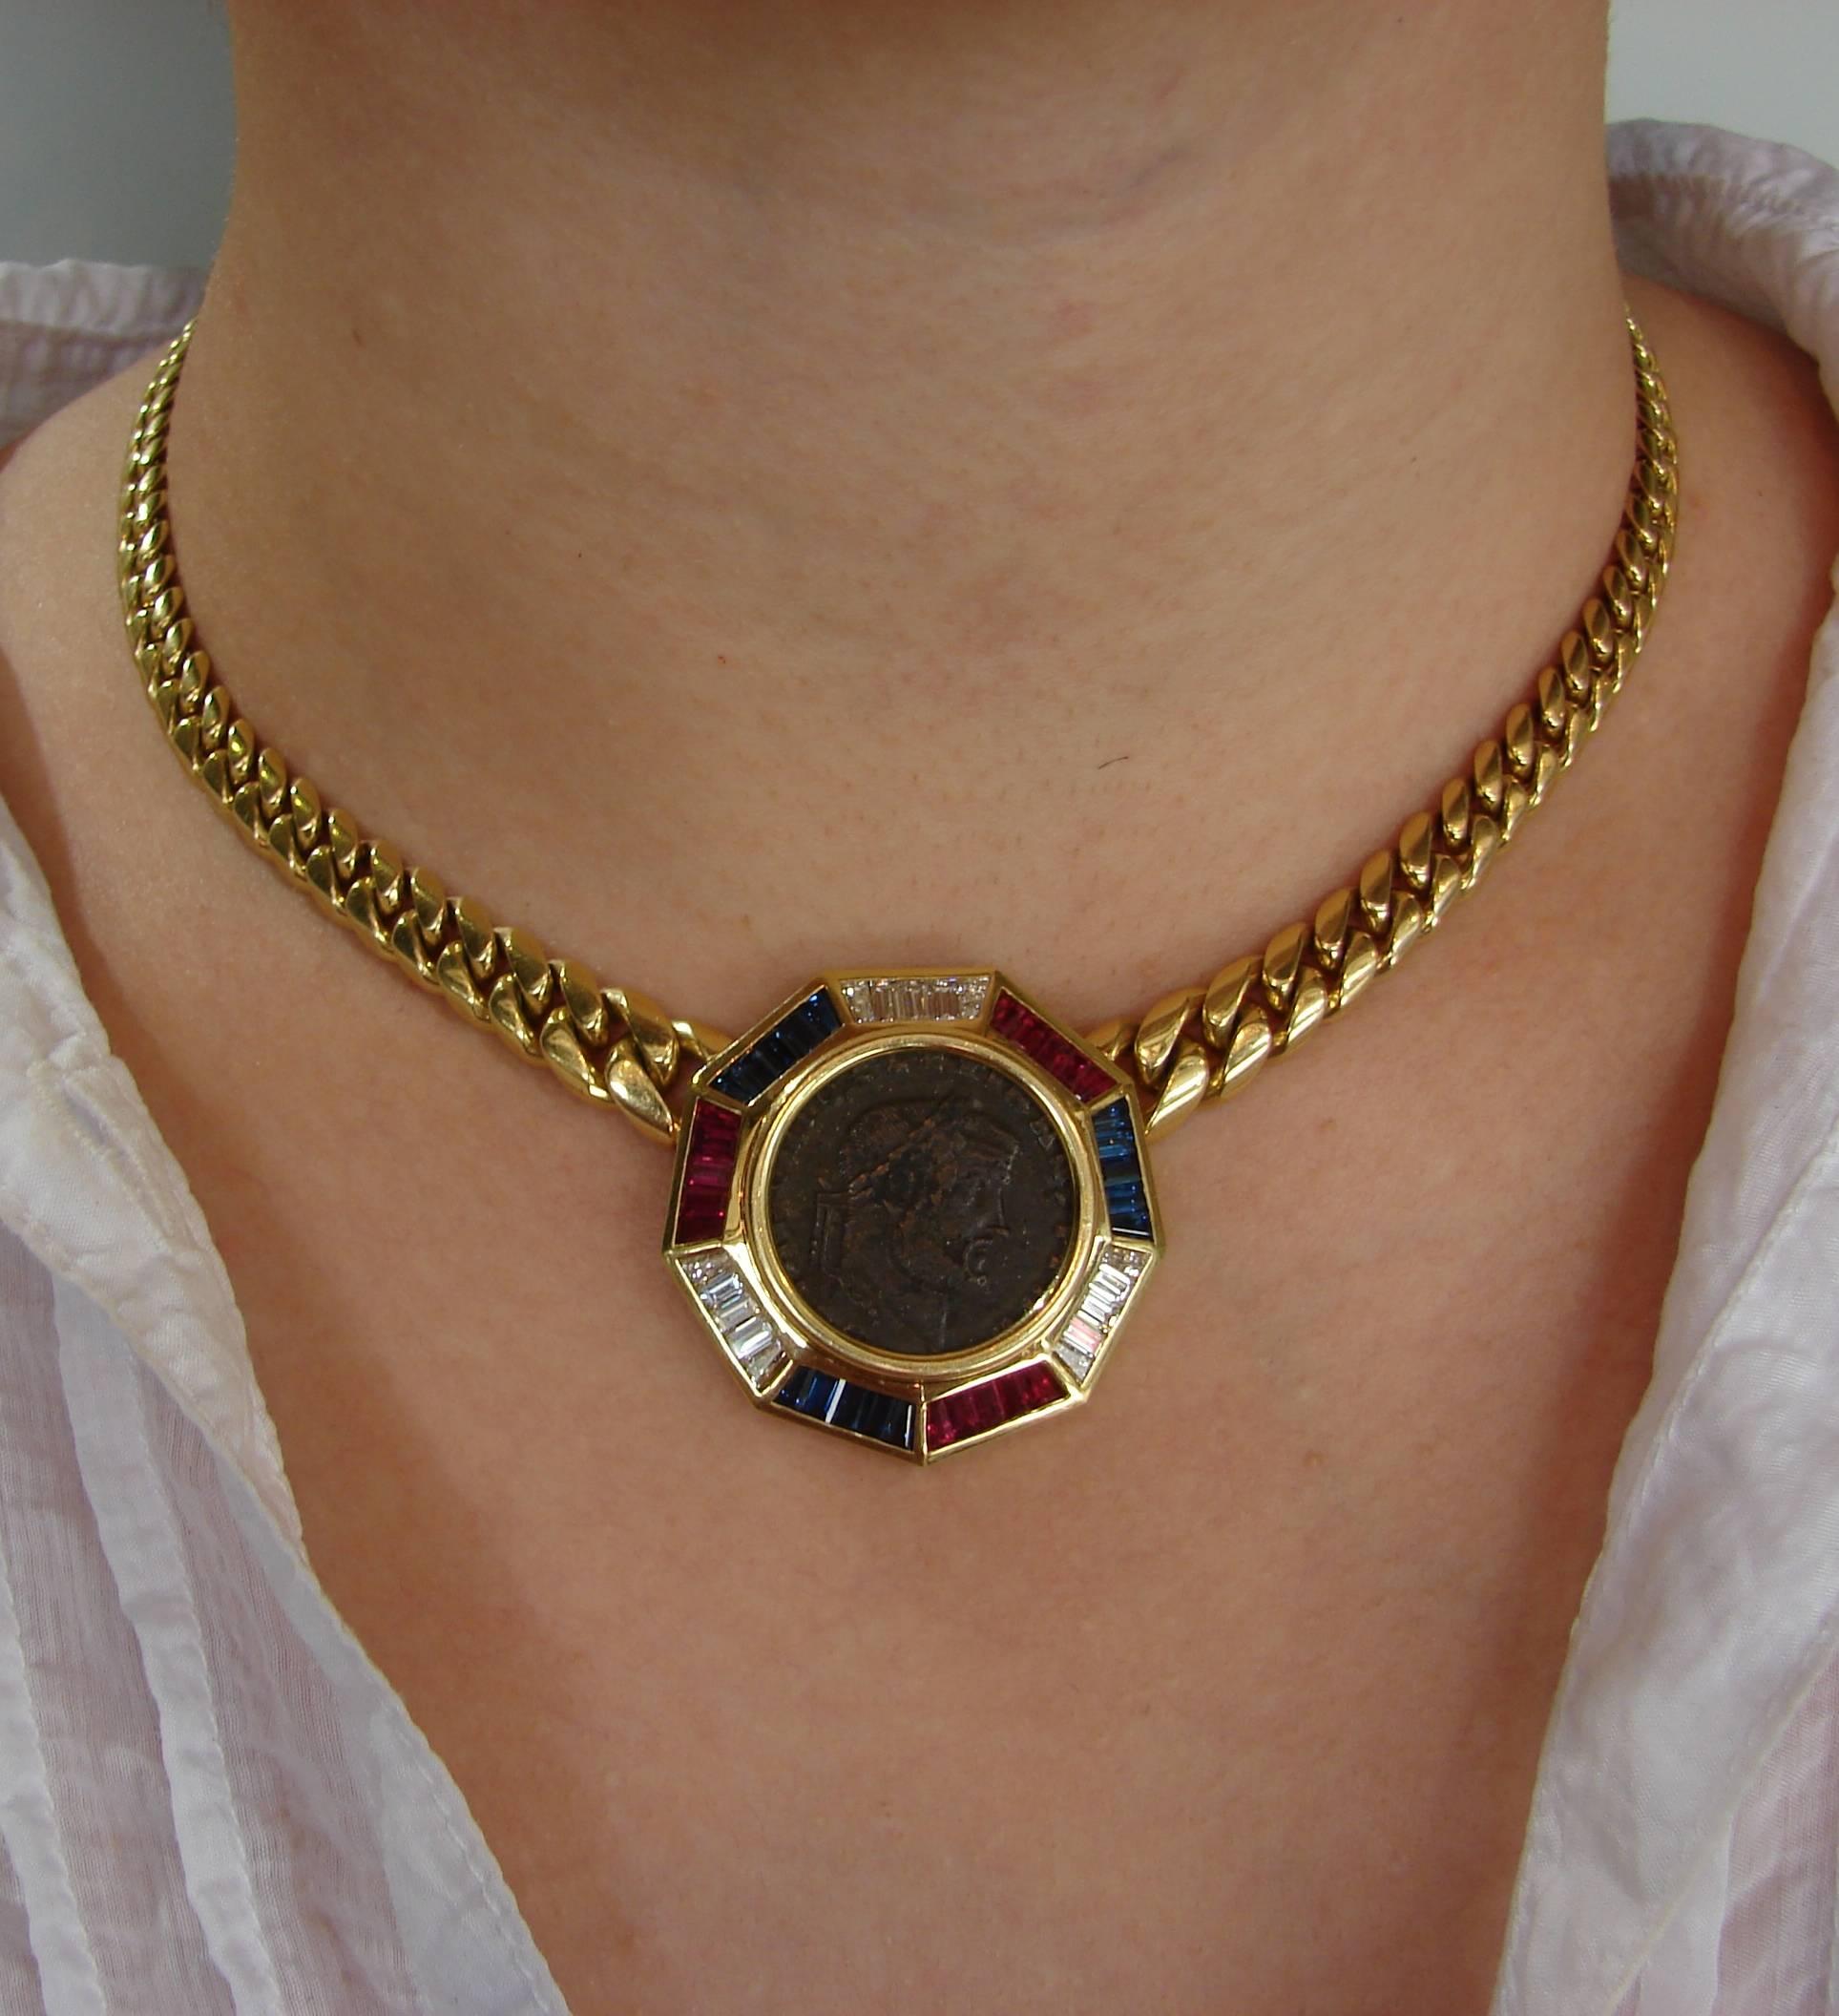 Signature Bulgari coin pendant necklace created in the 1970s. It features an ancient Maxentius bronze coin set in 18 karat yellow gold and accented with baguette cut diamonds, rubies and sapphires. 
The necklace is 16 inches (40 cm) long and weighs